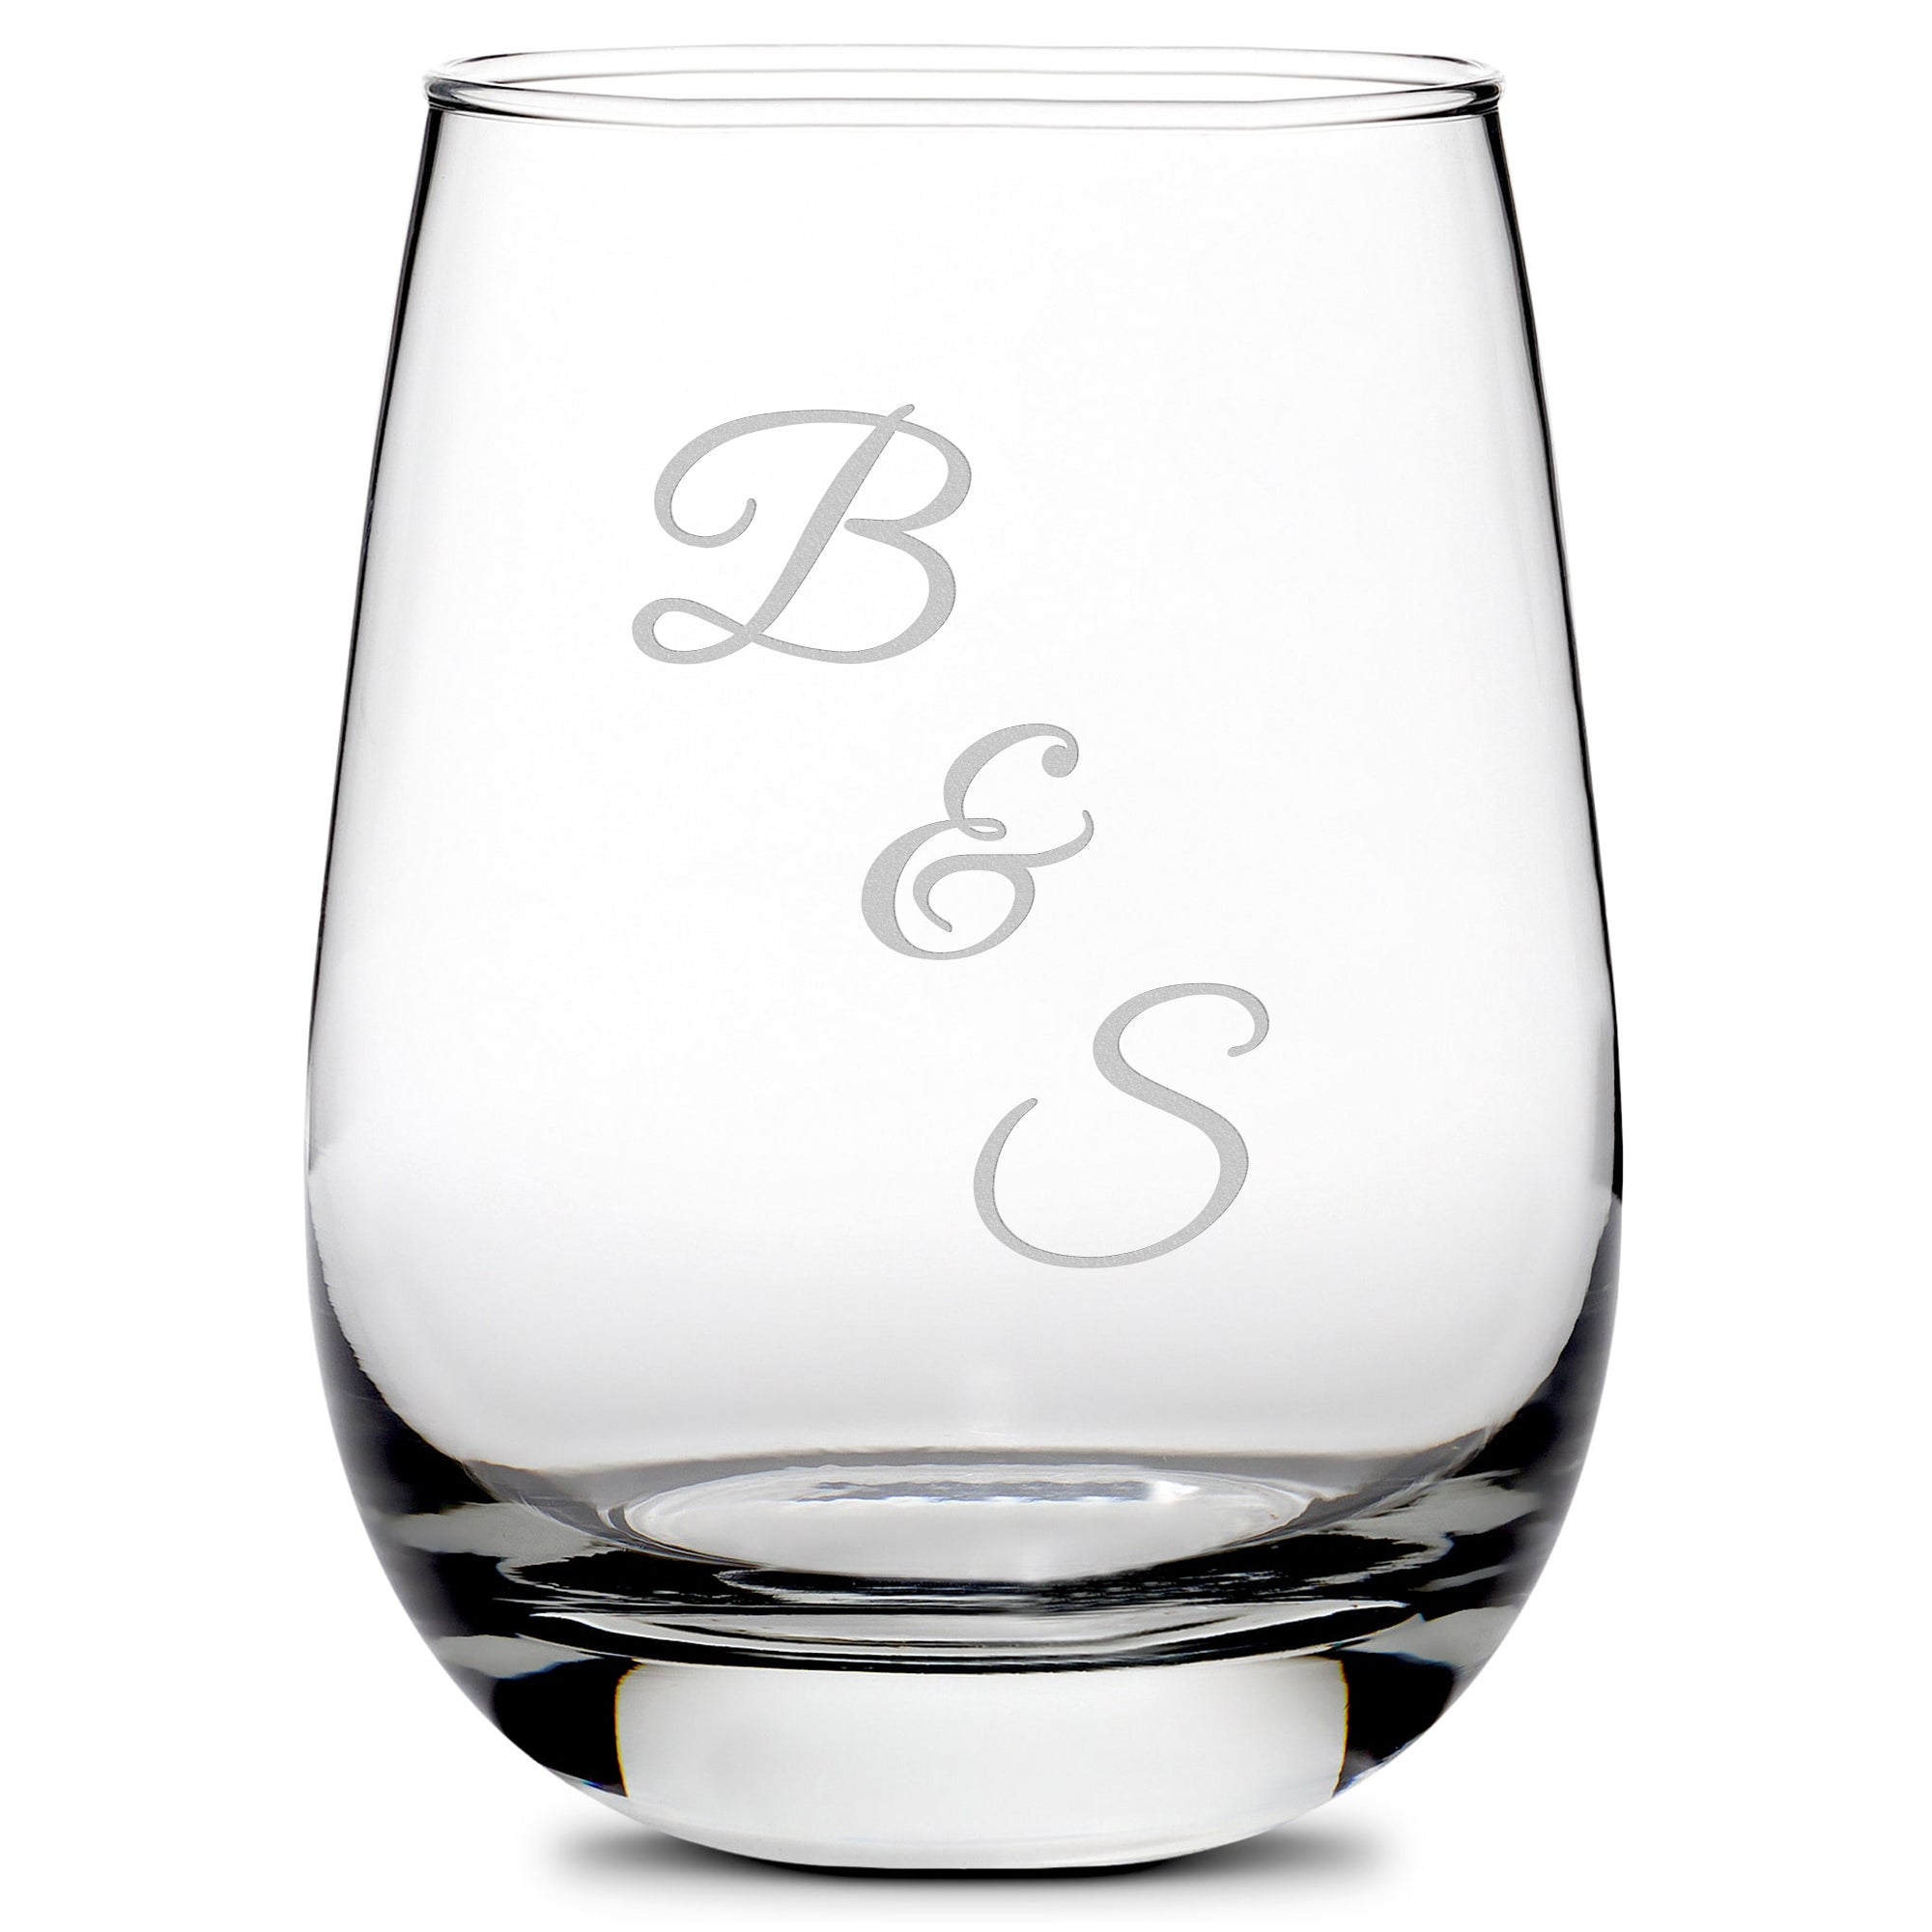 Integrity Bottles, Initials, Stemless Wine Glasses, Handmade, Handblown, Hand Etched Gifts, Sand Carved, 16oz